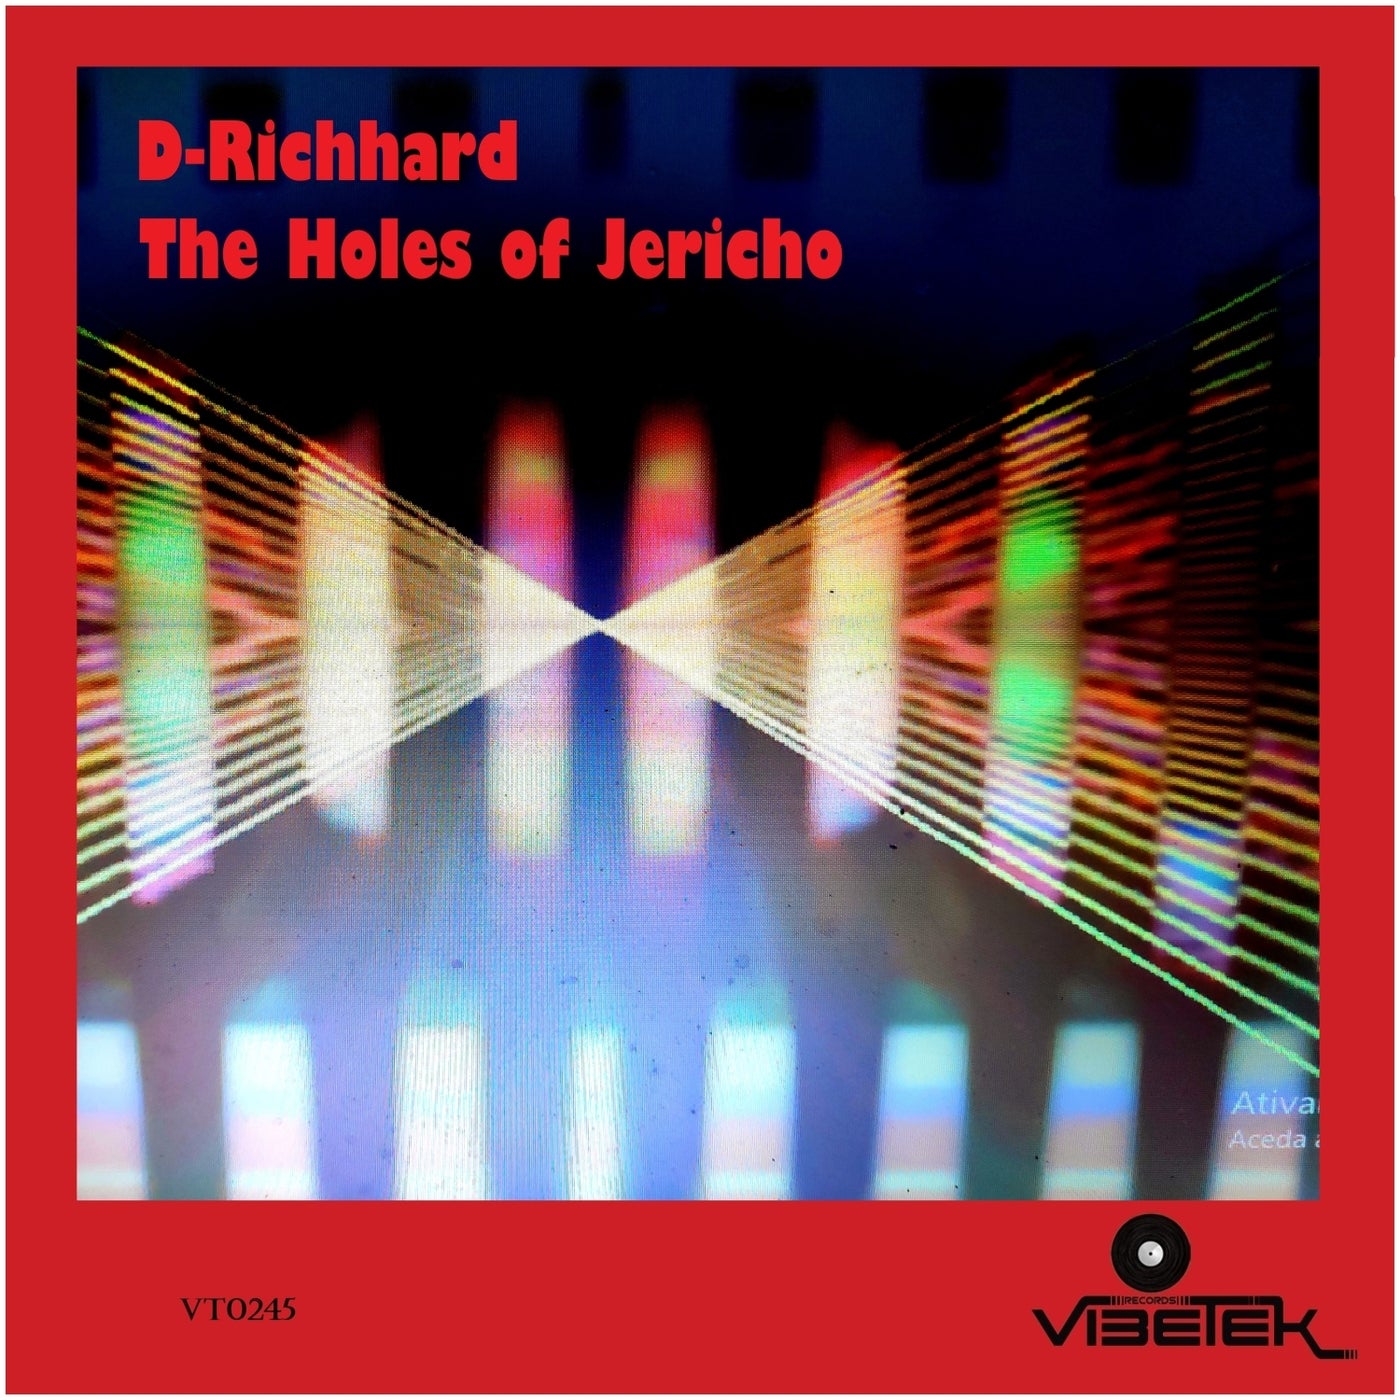 The Holes of Jericho